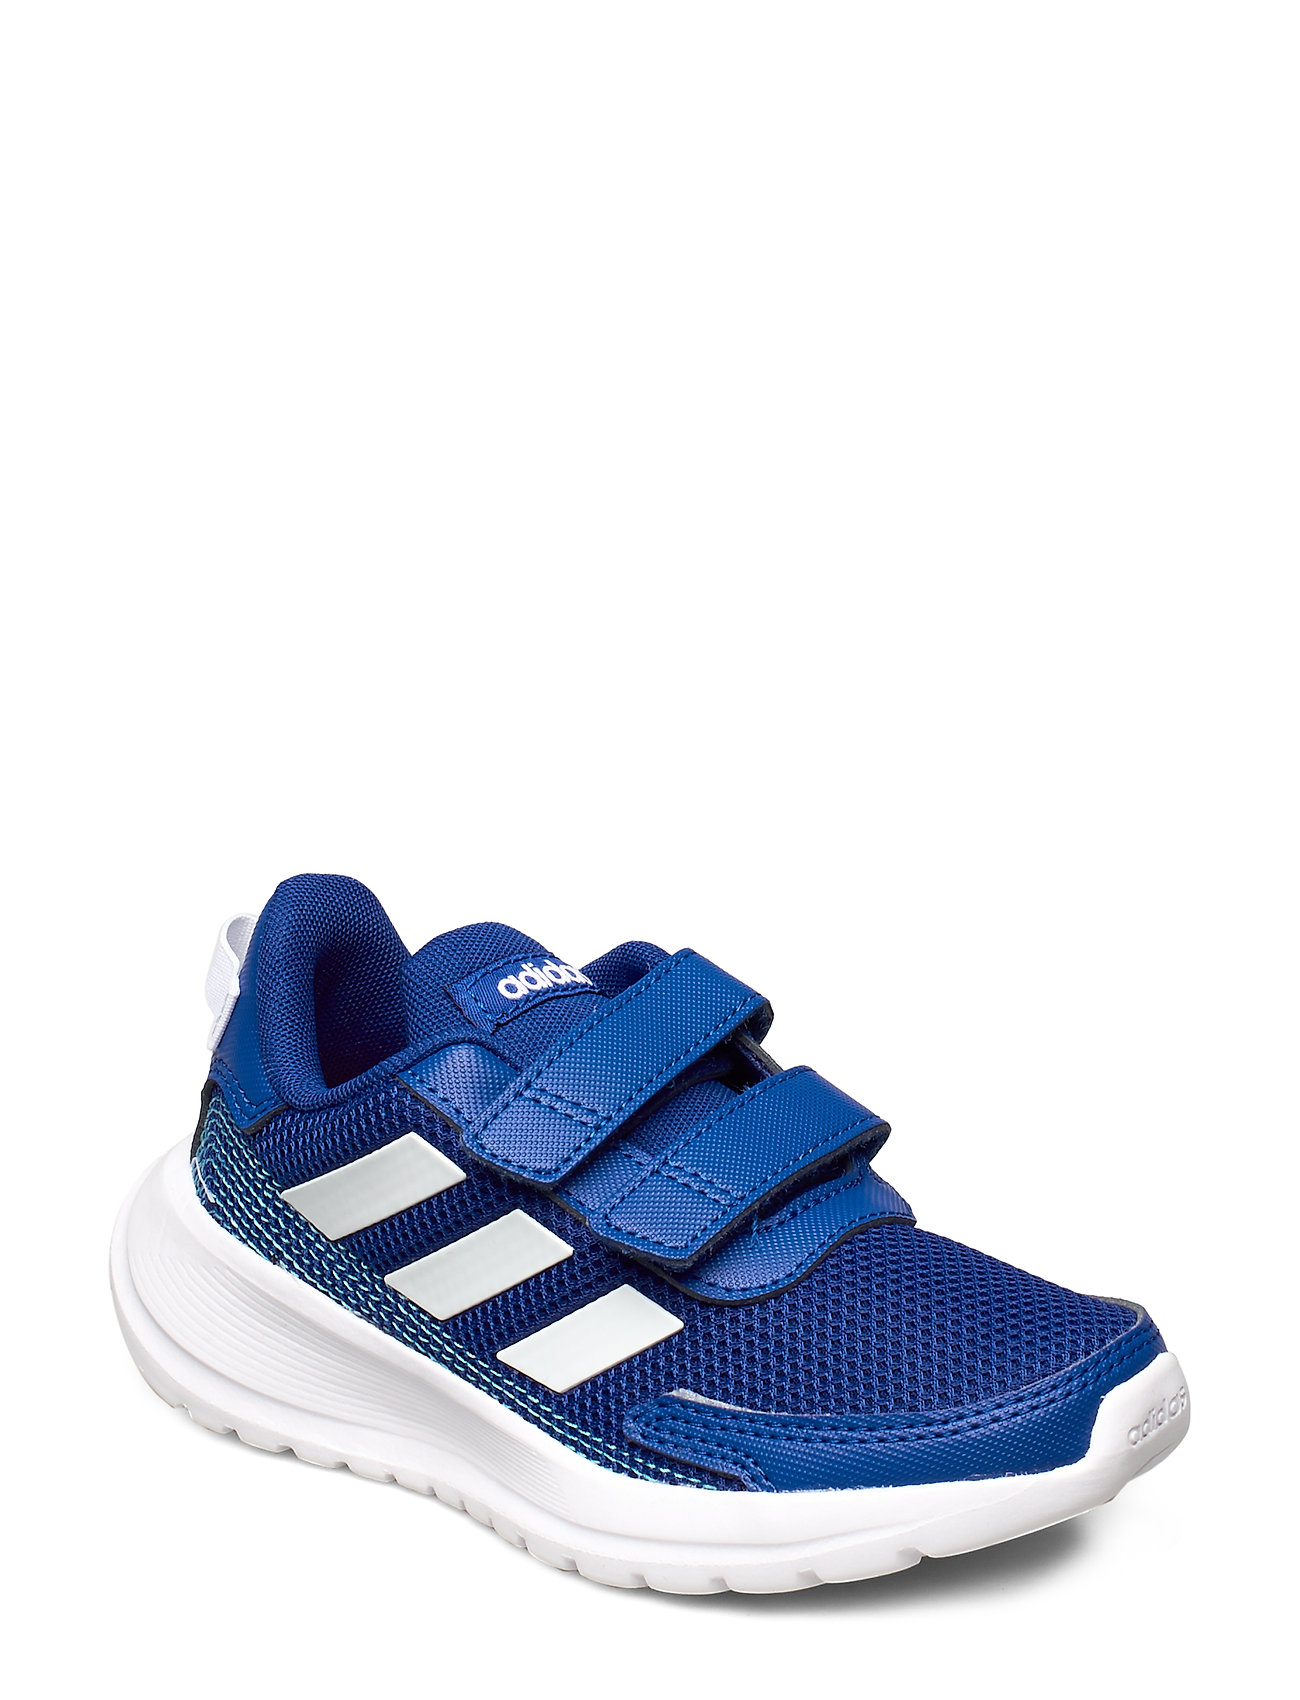 Tensor Shoes Sports Shoes Running/training Shoes Sininen Adidas Performance, adidas Performance